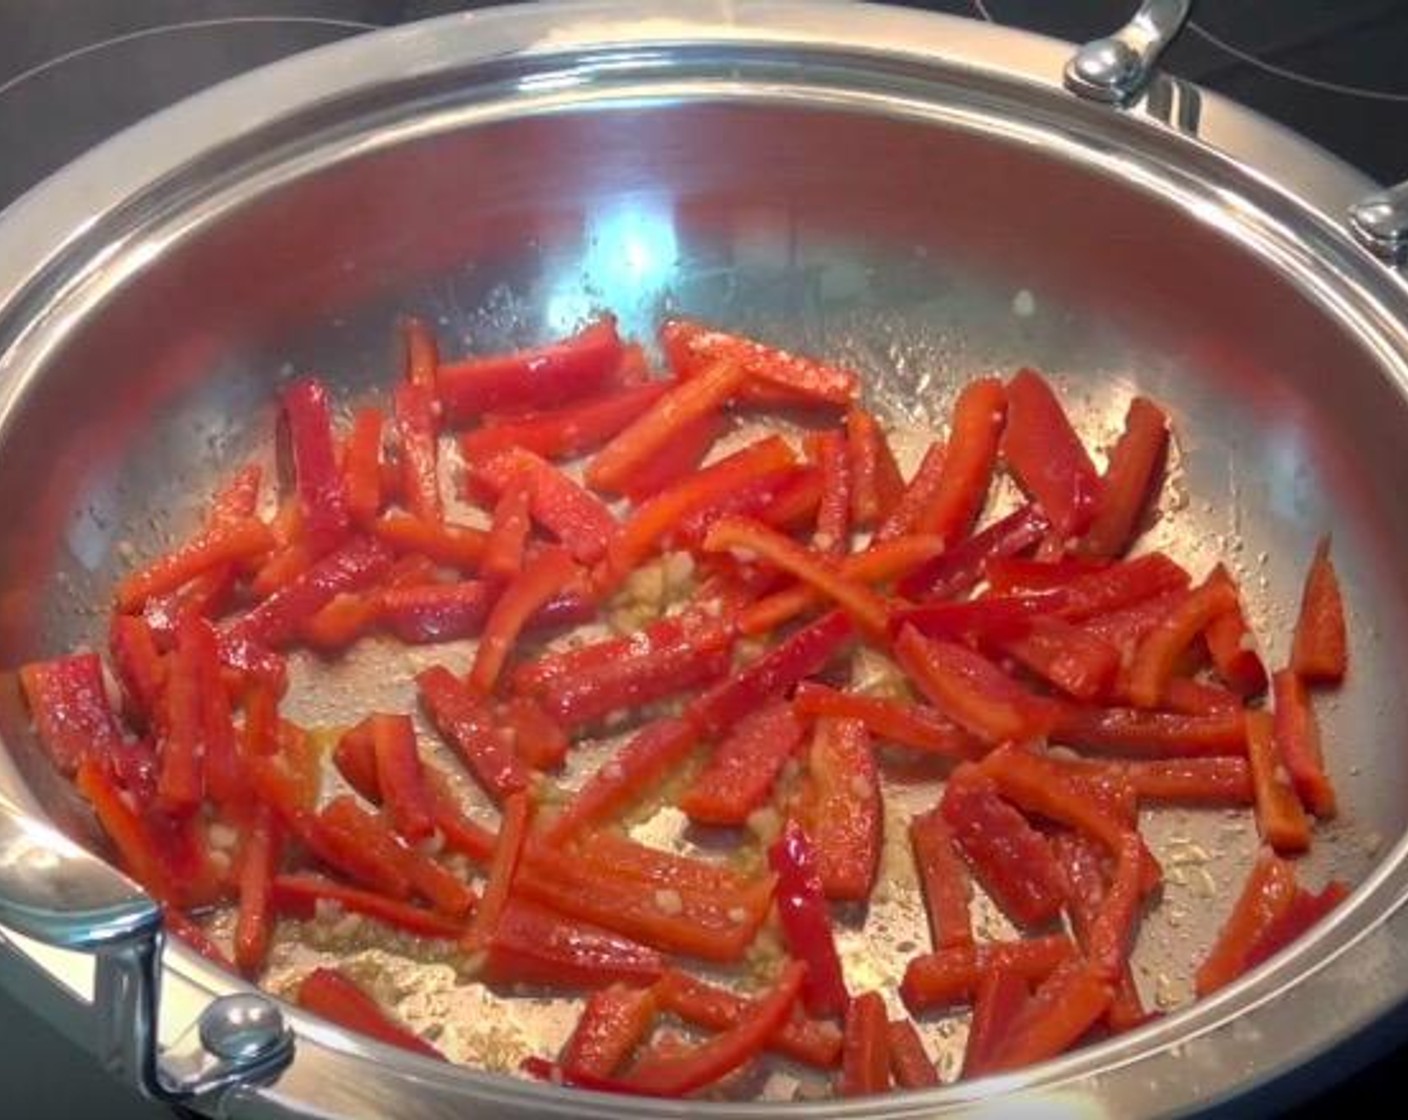 step 1 In a heavy-based pan, add Olive Oil (1 splash), Garlic (2 cloves) and Red Bell Peppers (2). Cook, stirring, over a medium-high heat for 2-3 minutes, or until bell peppers begin to soften.